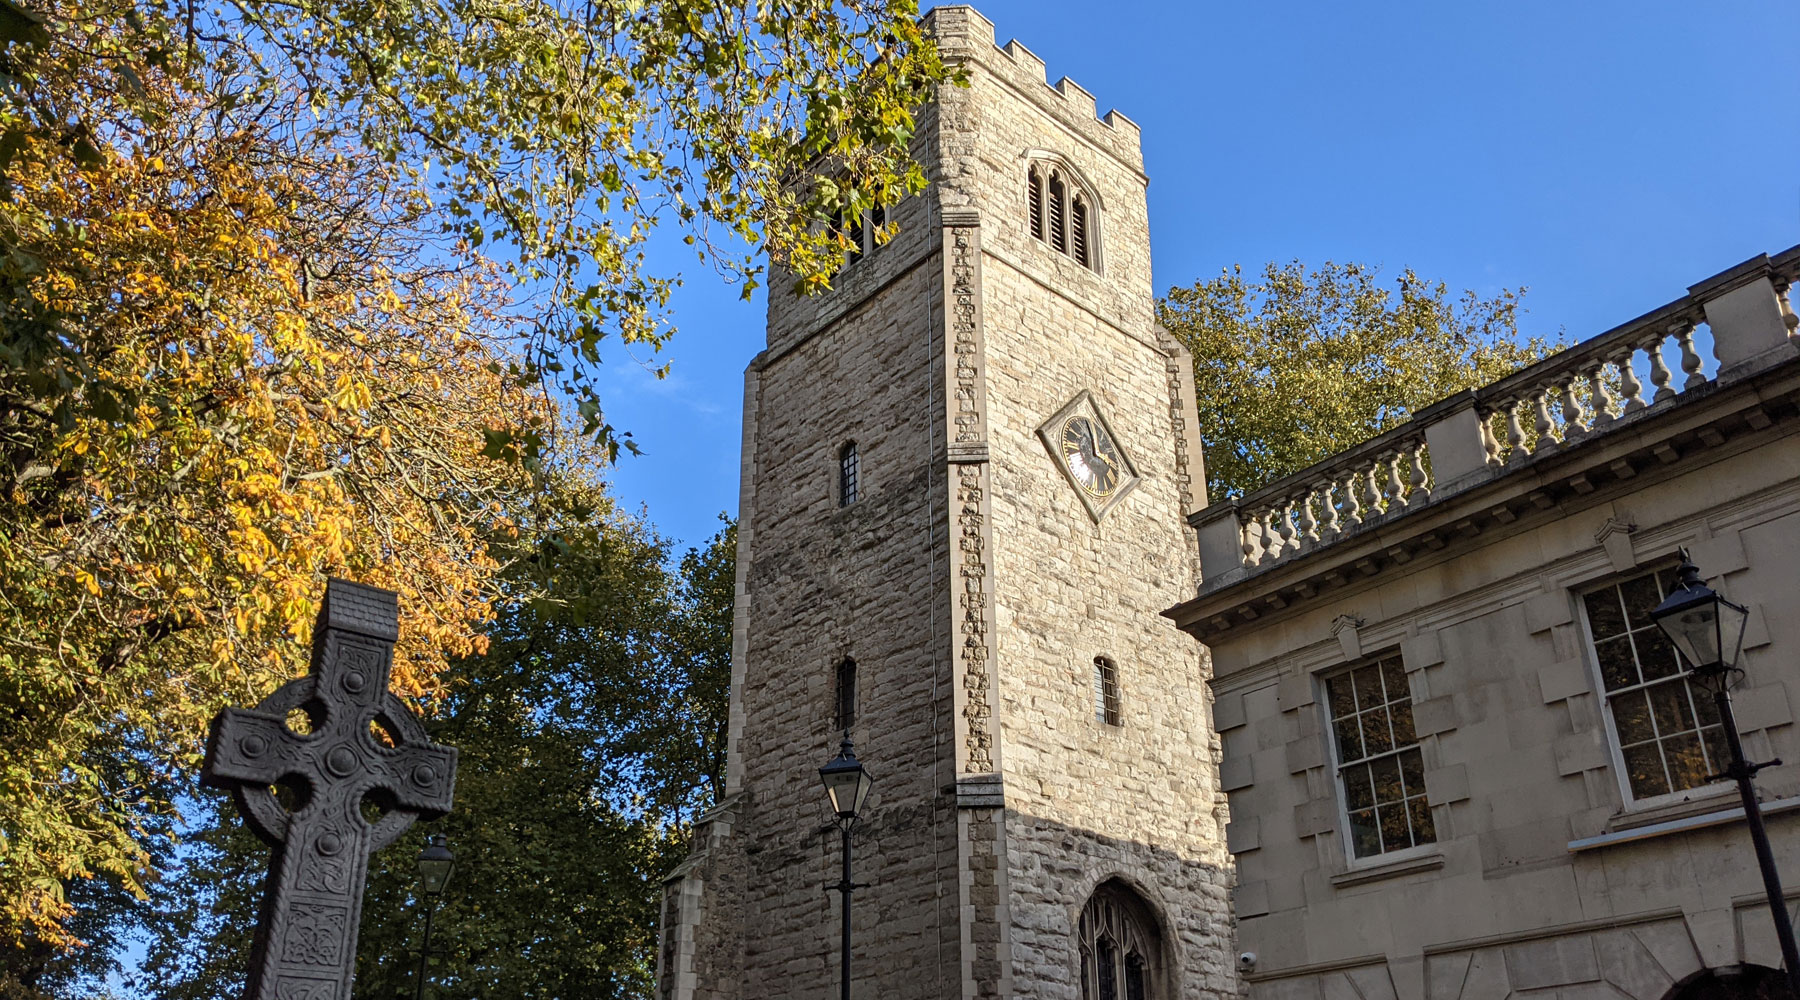 You can climb up Hackney's medieval clock tower